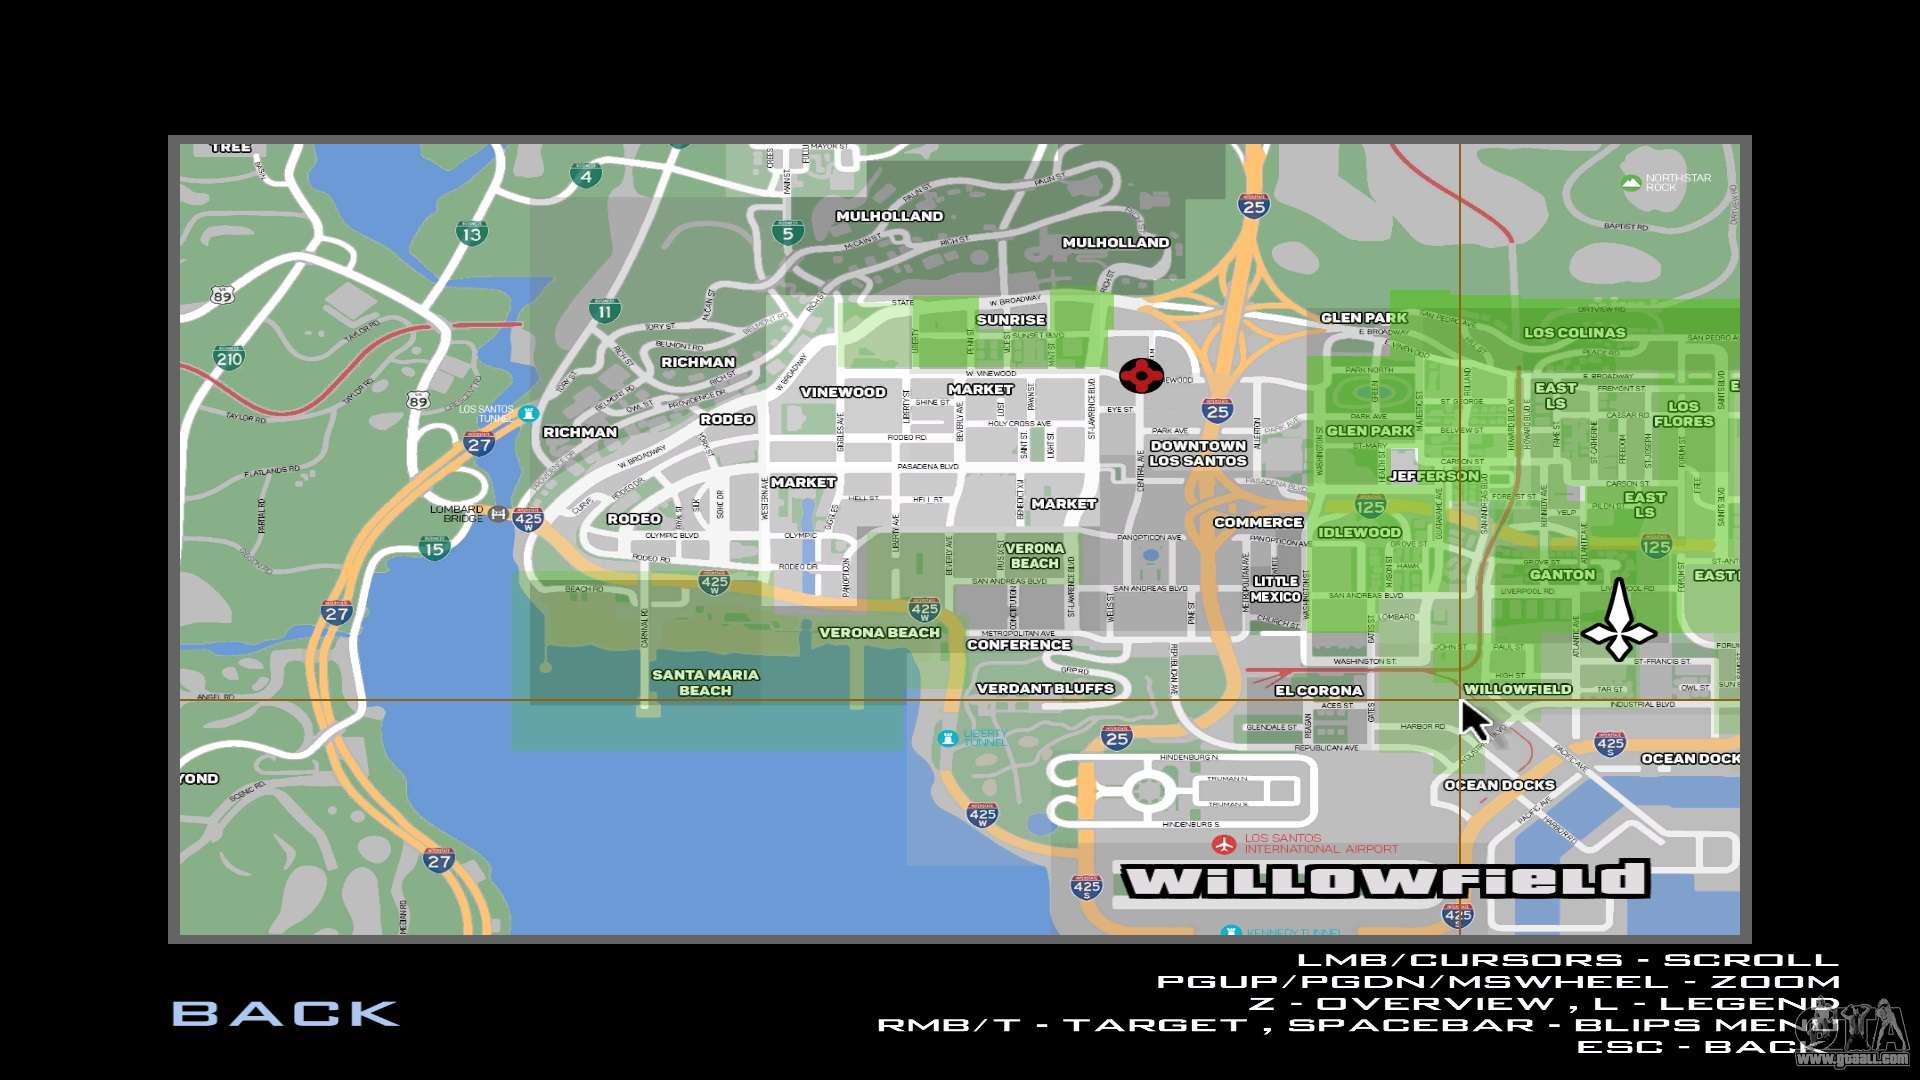 gta vice city cheats helicopter mobile